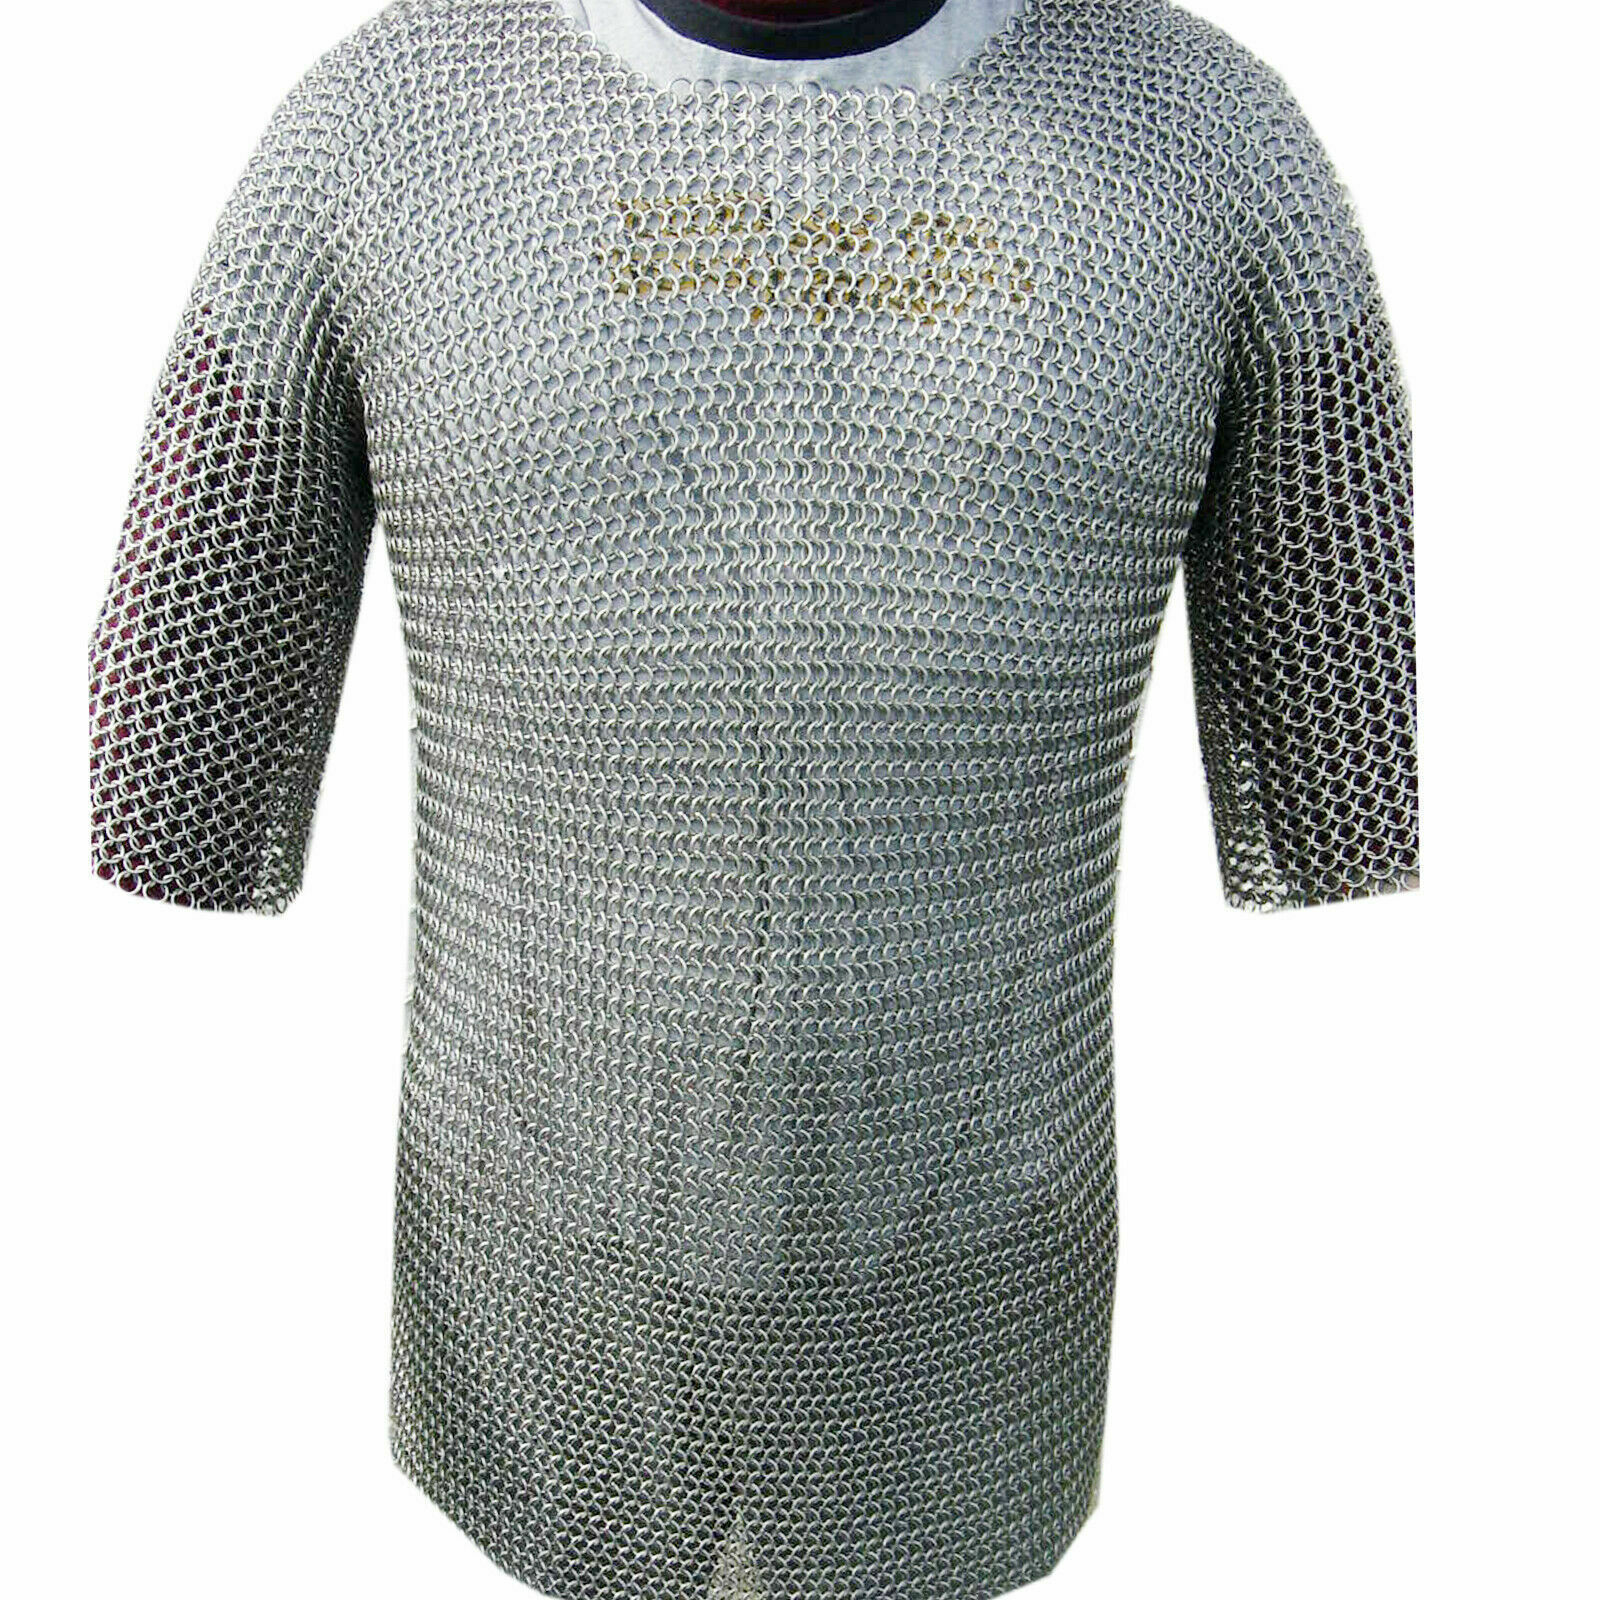 10MM  CHAINMAIL HAUBERGEON BUTTED MILD STEEL SHIRT X-LARGE SHIRT BLACKED  ARMOR 